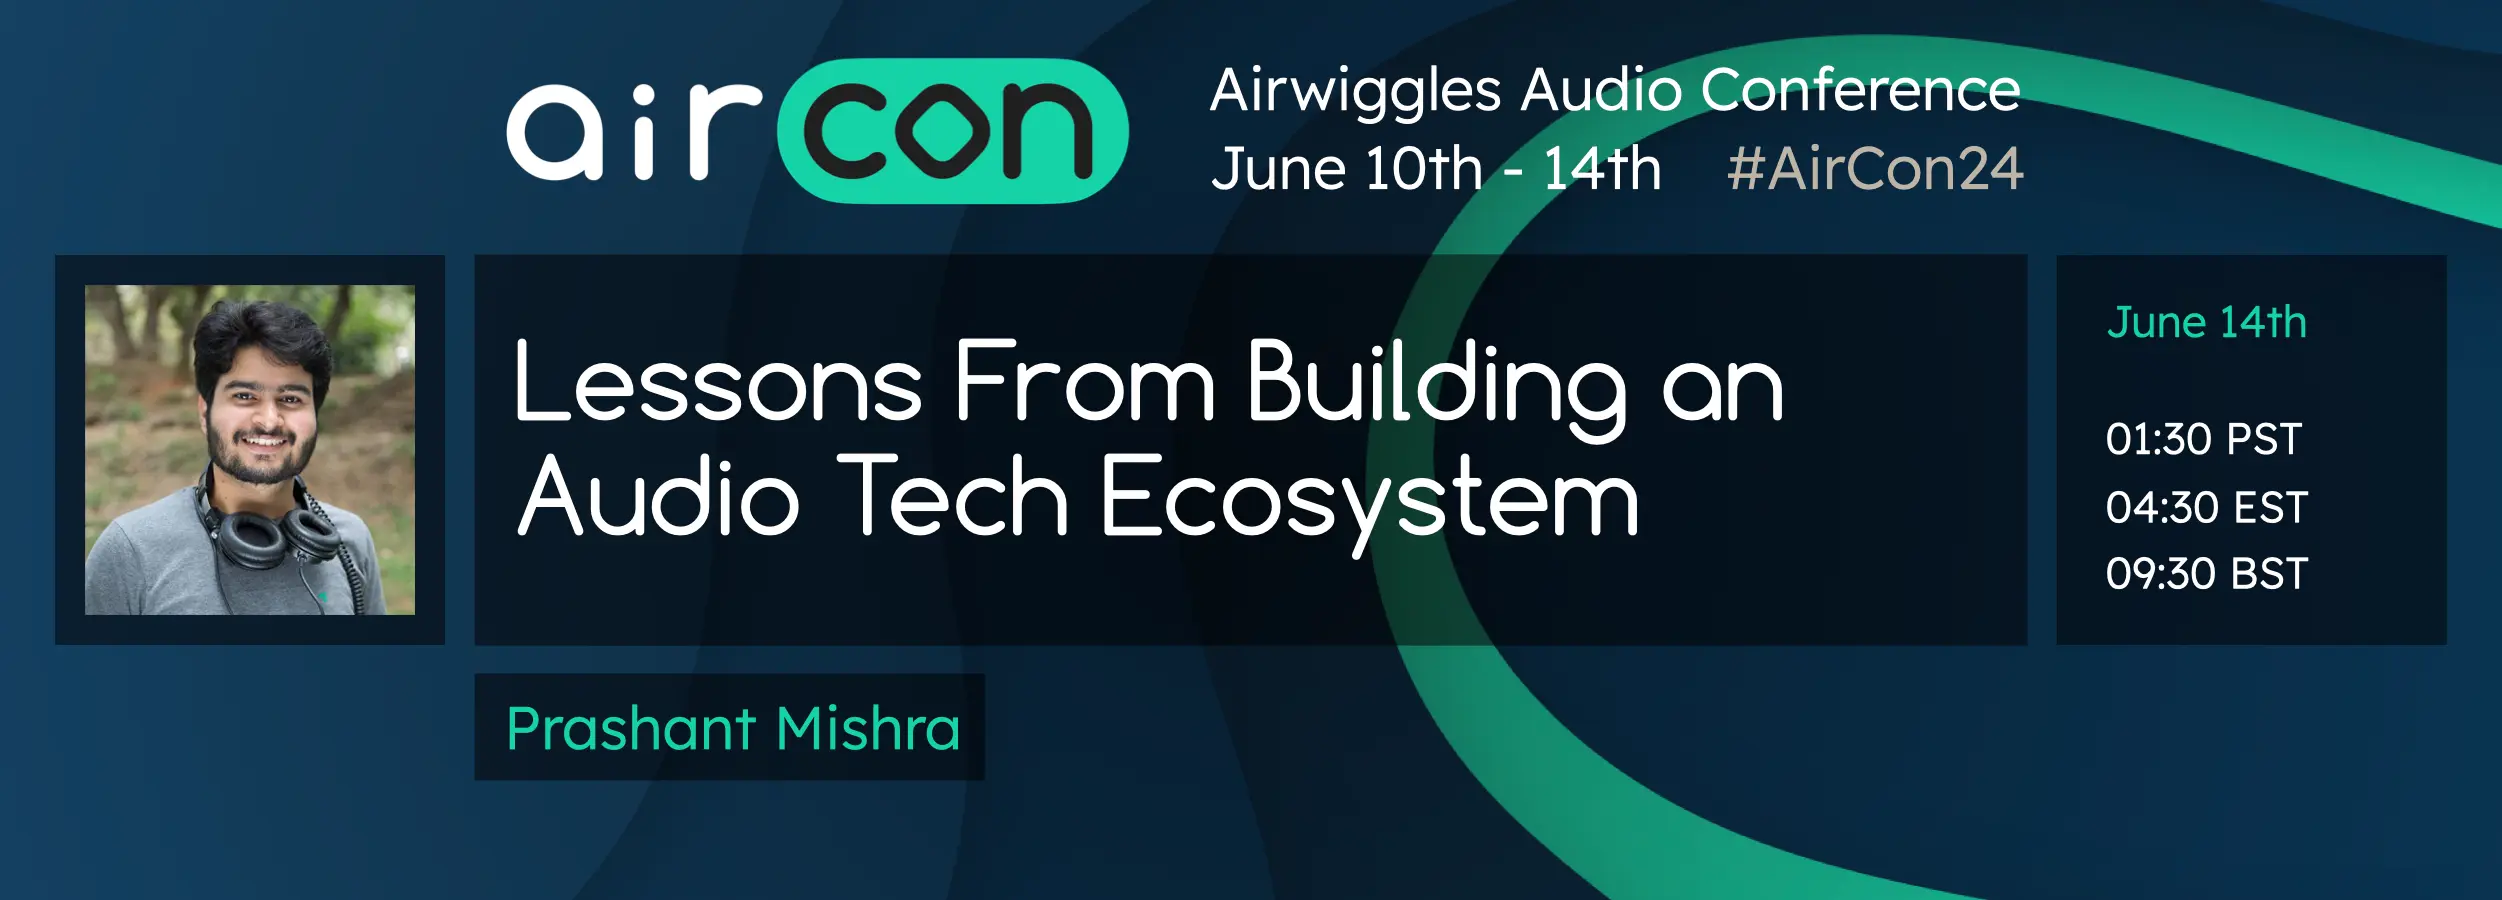 AirCon24 talk by Prashant Mishra - Lessons from Building an Audio Tech Ecosystem